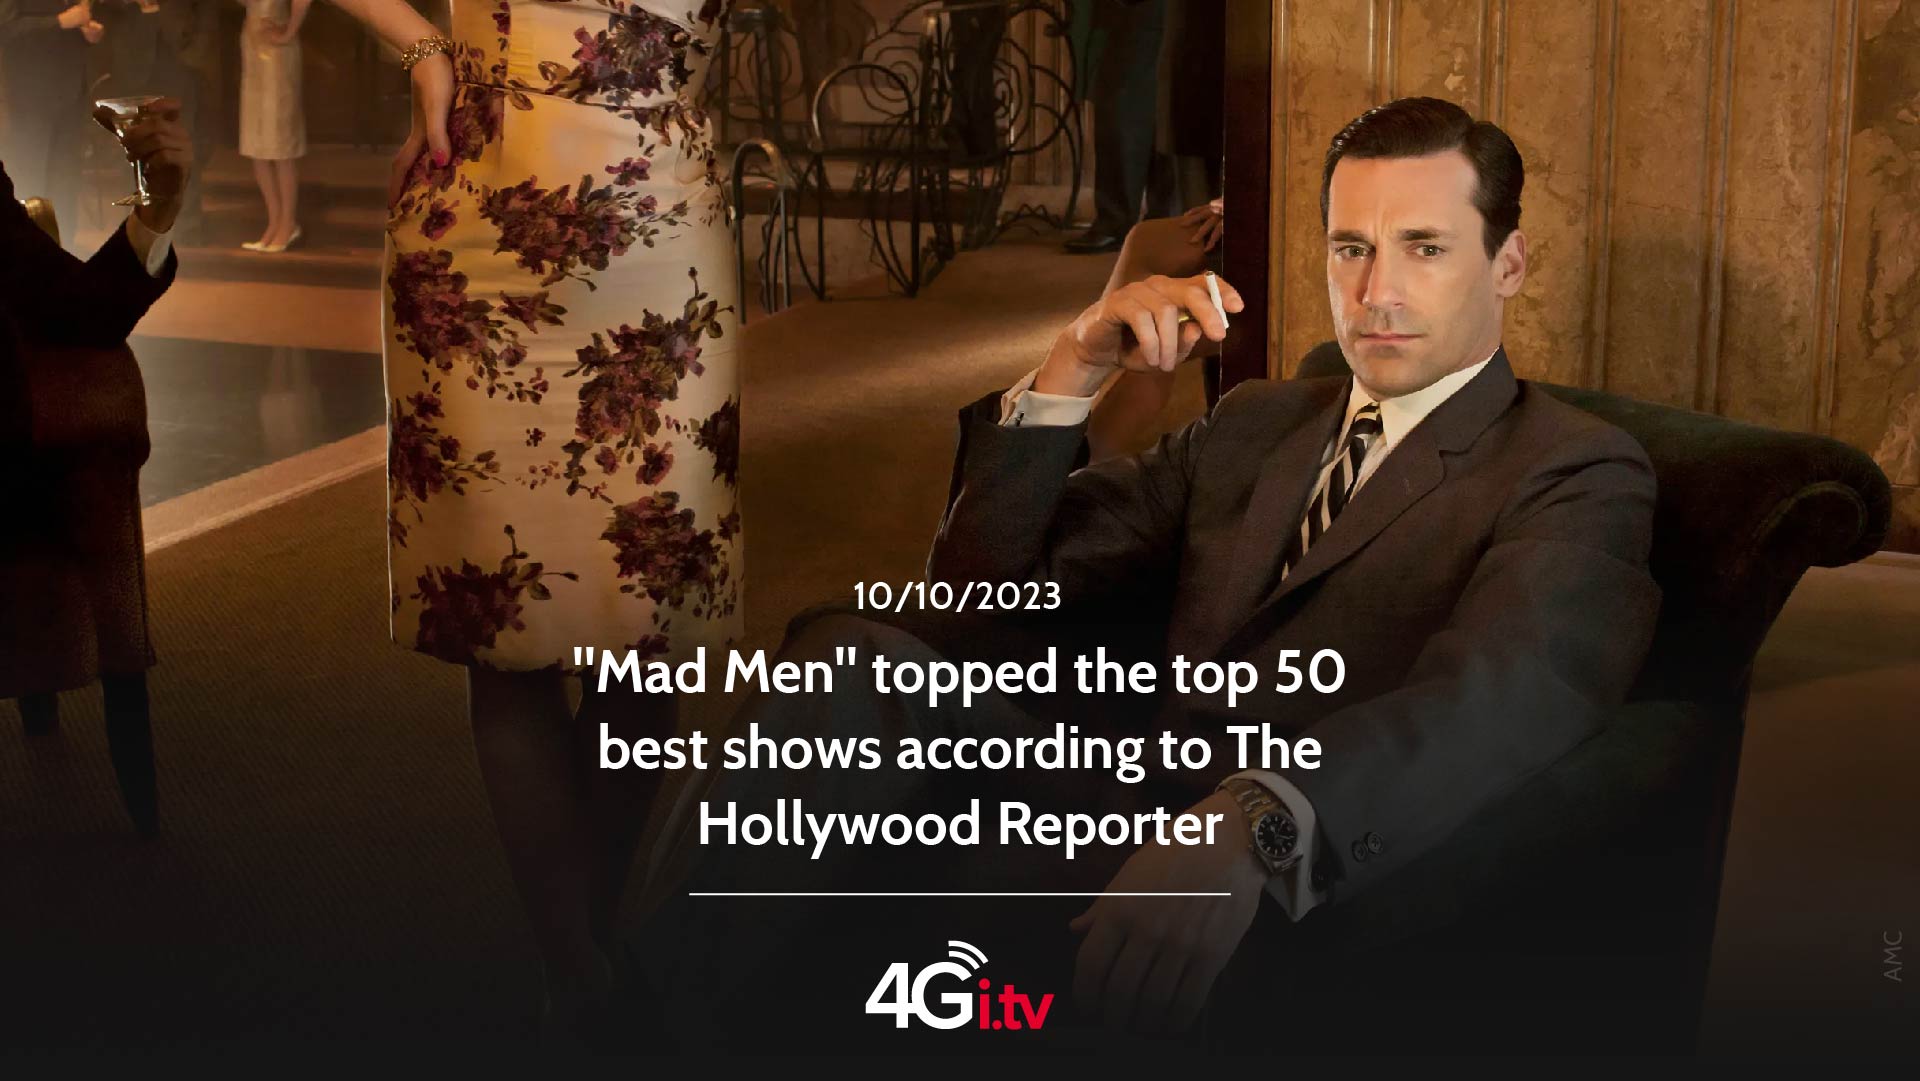 Подробнее о статье “Mad Men” topped the top 50 best shows according to The Hollywood Reporter